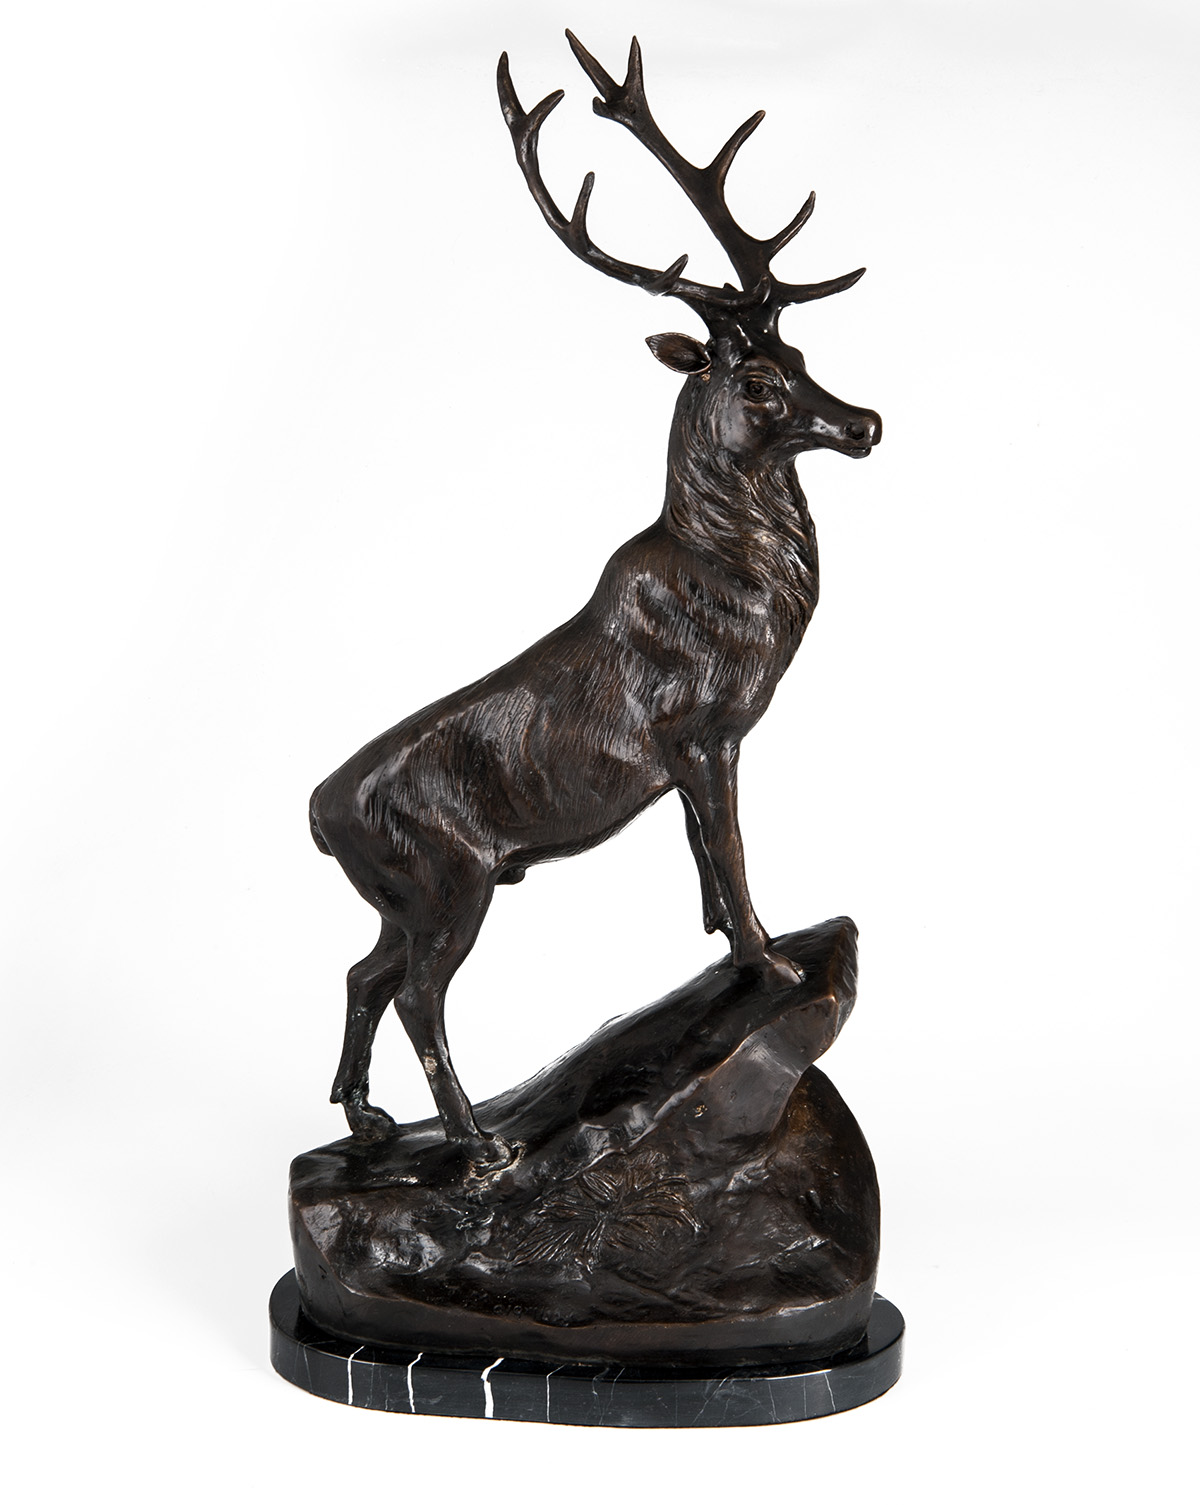 A PAIR OF BRONZE STAGS SIGNED BY T. MAIGNIERY, each standing on a rocky prominence and mounted on - Image 2 of 7